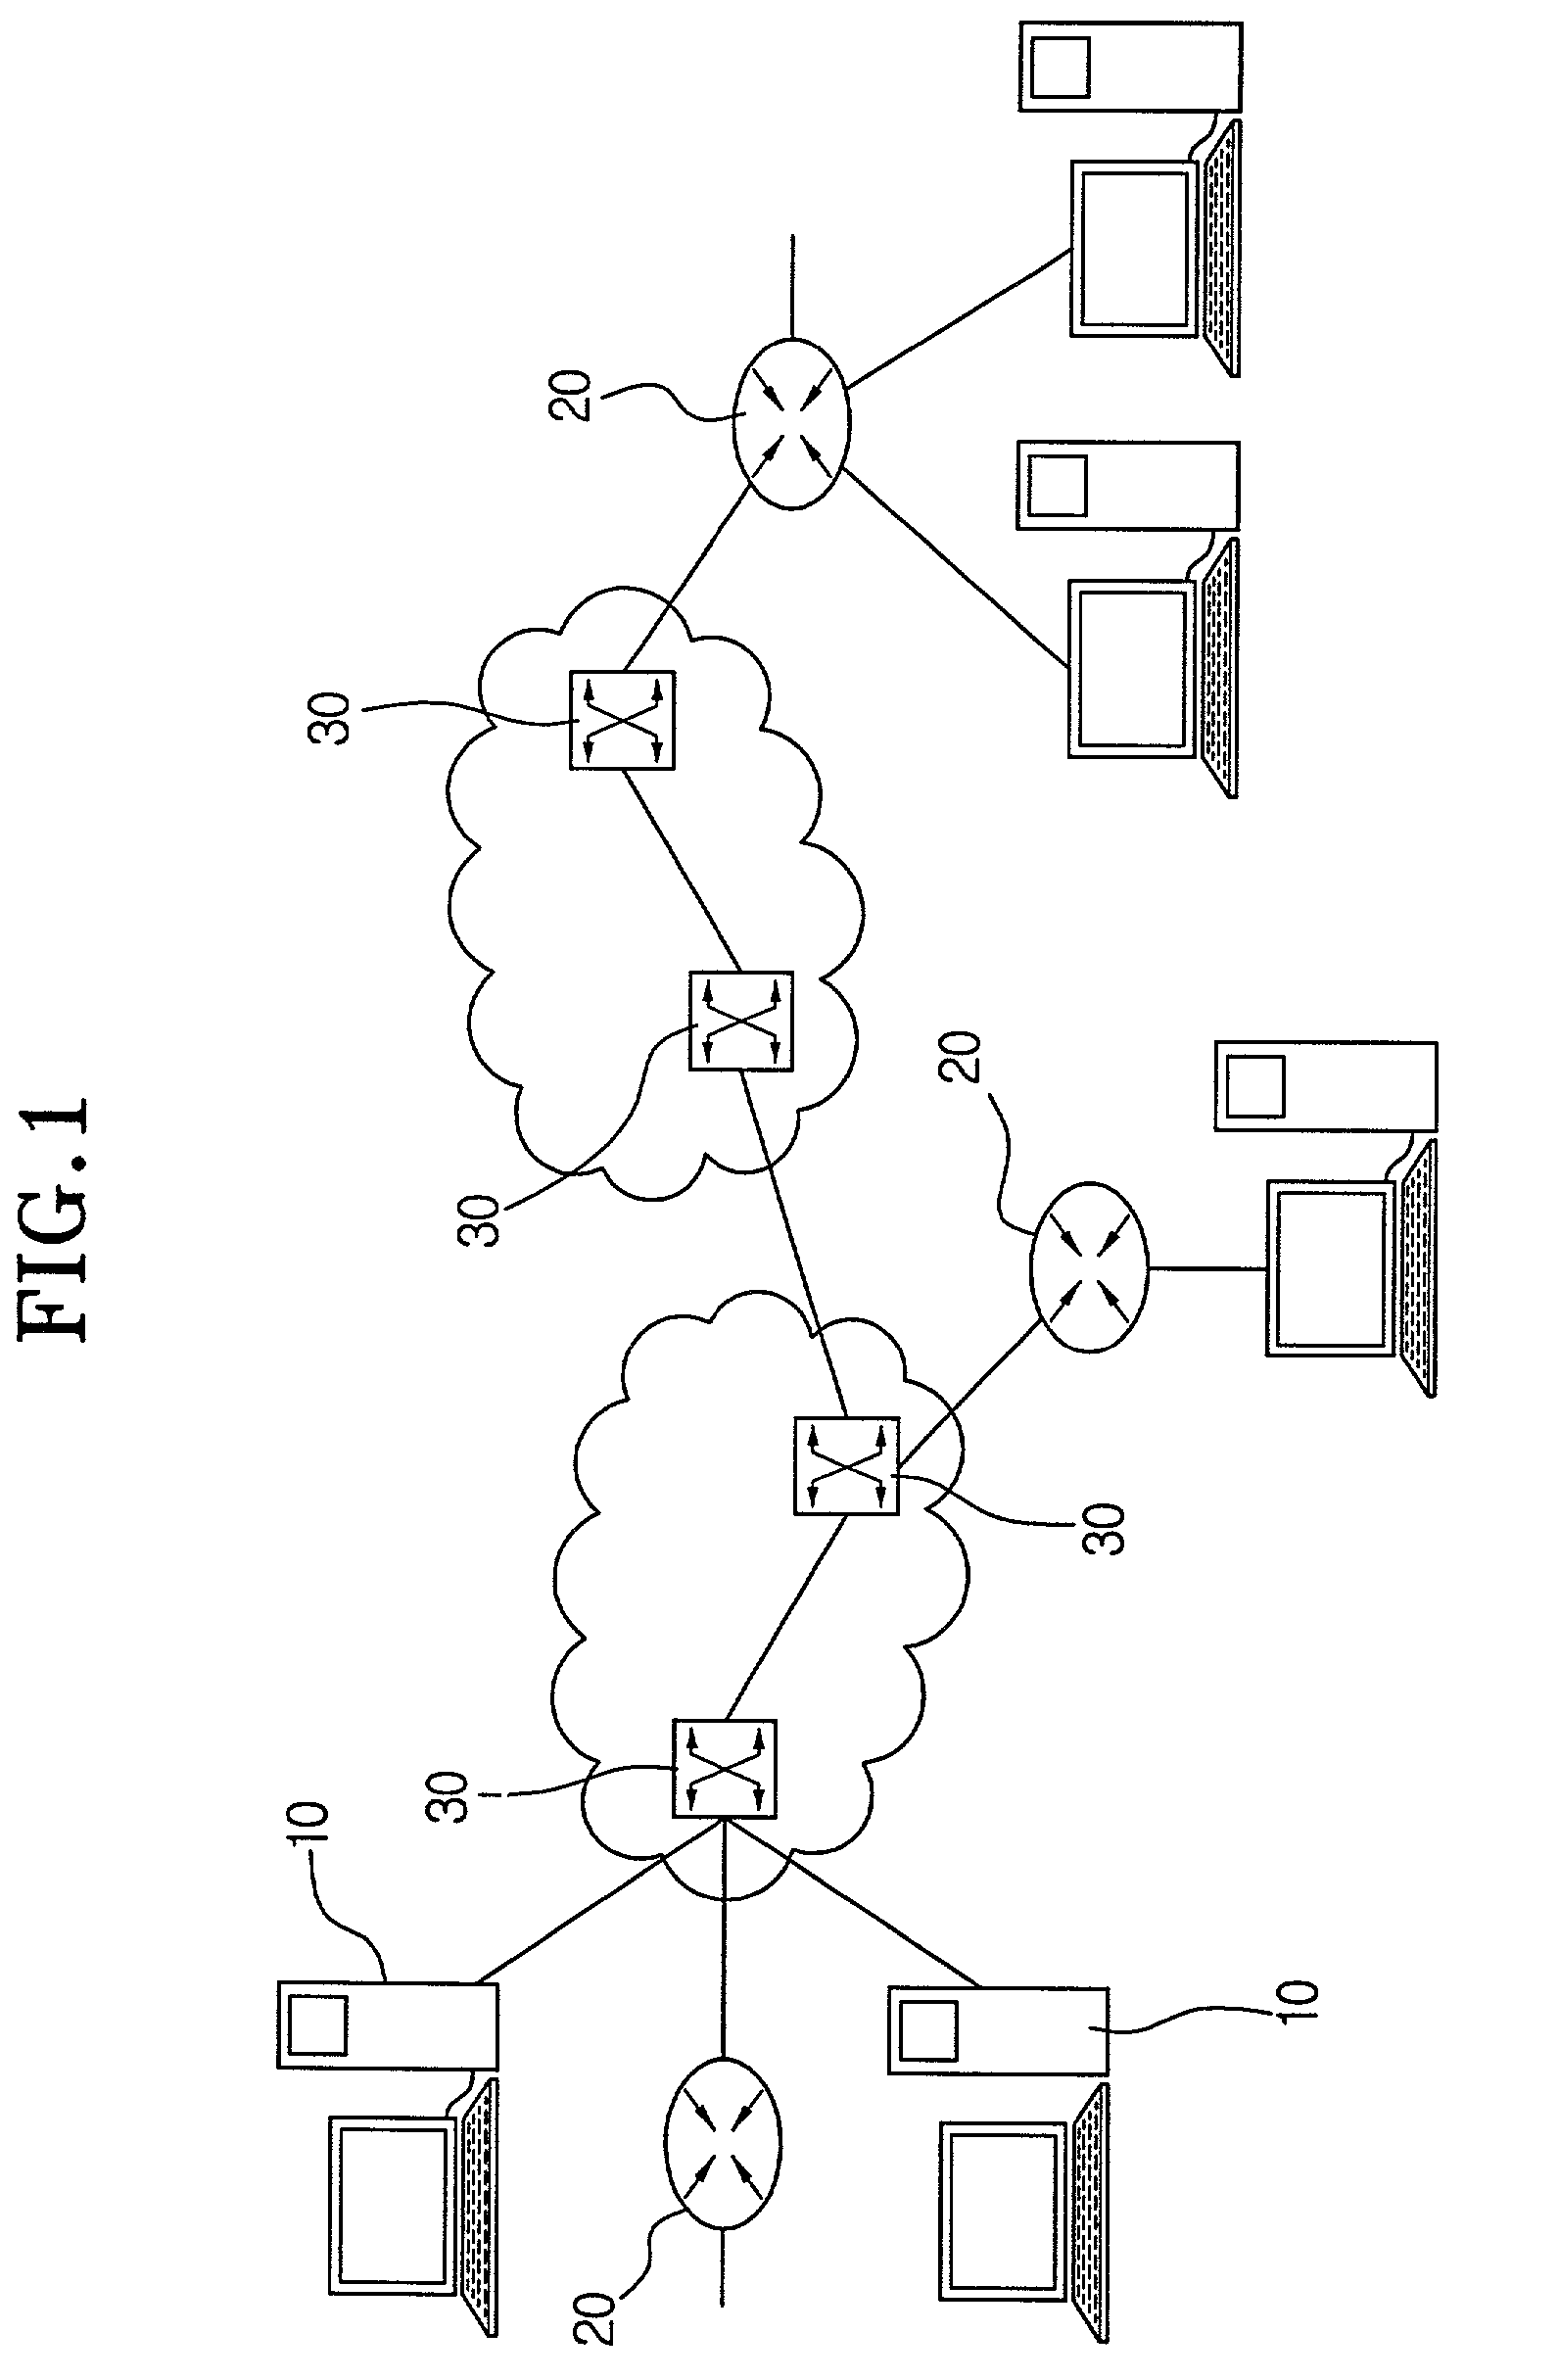 Apparatus for analyzing performance of traffic in asynchronous transfer mode (ATM) switch and method thereof, and ATM switching system employing the same